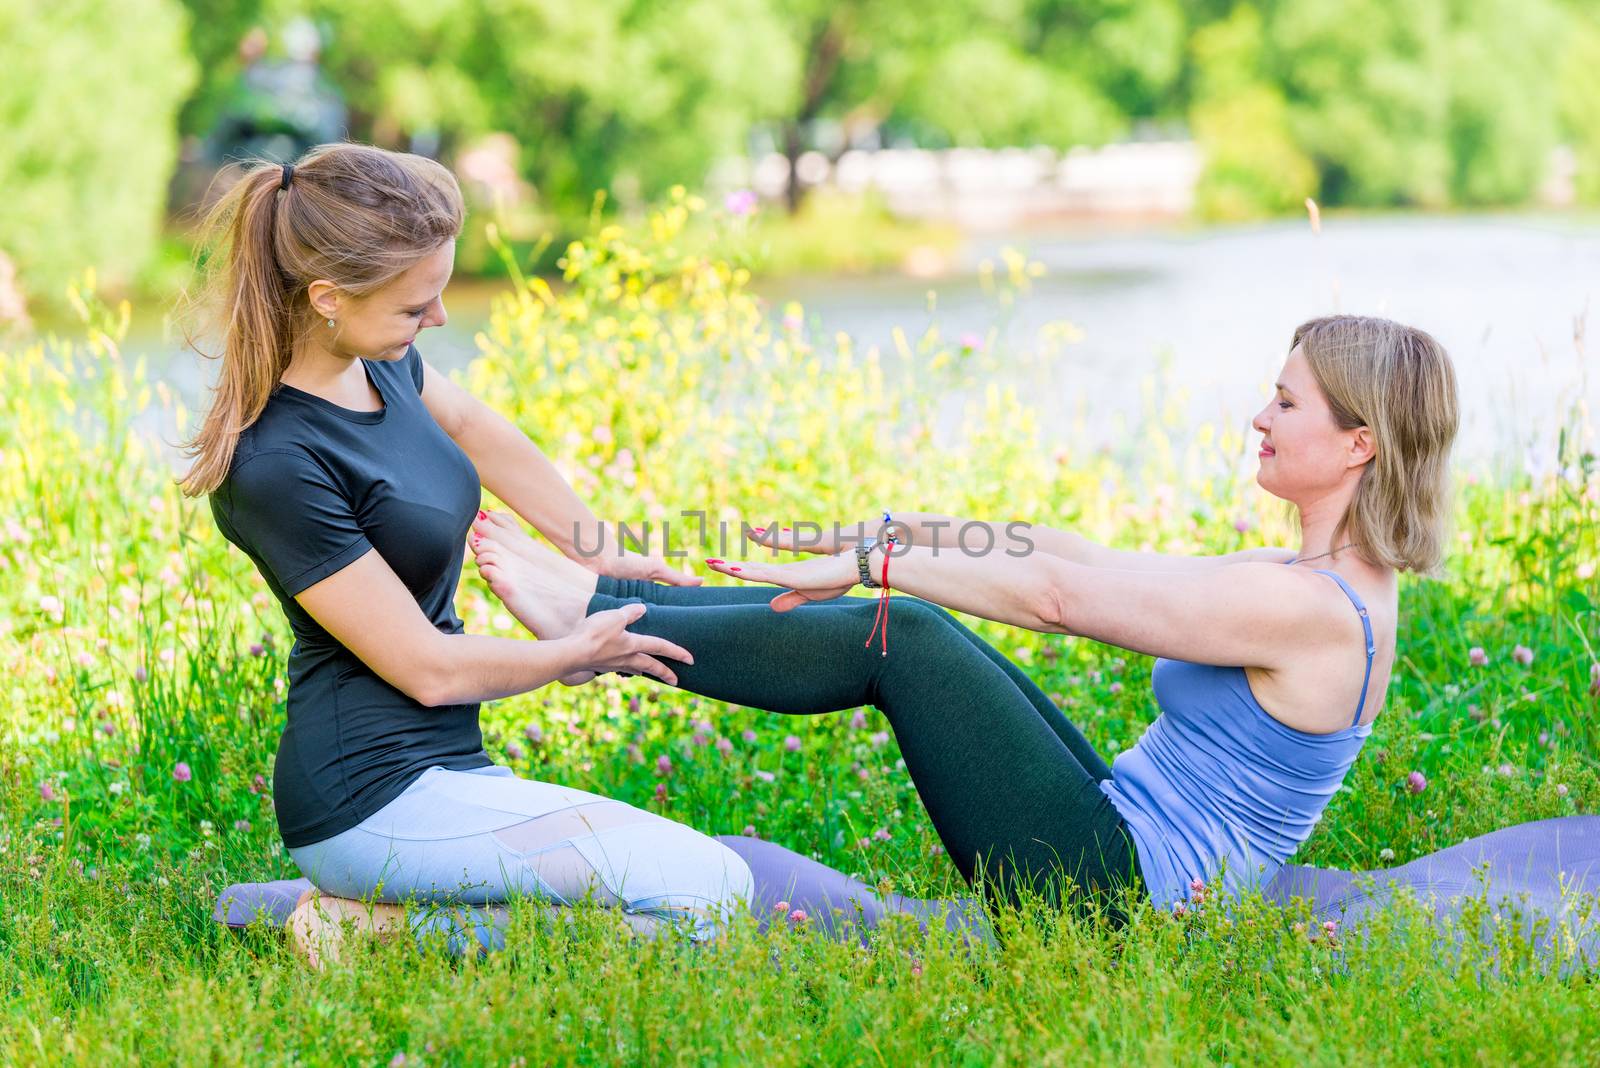 yoga exercise with an individual experienced trainer in the park by kosmsos111